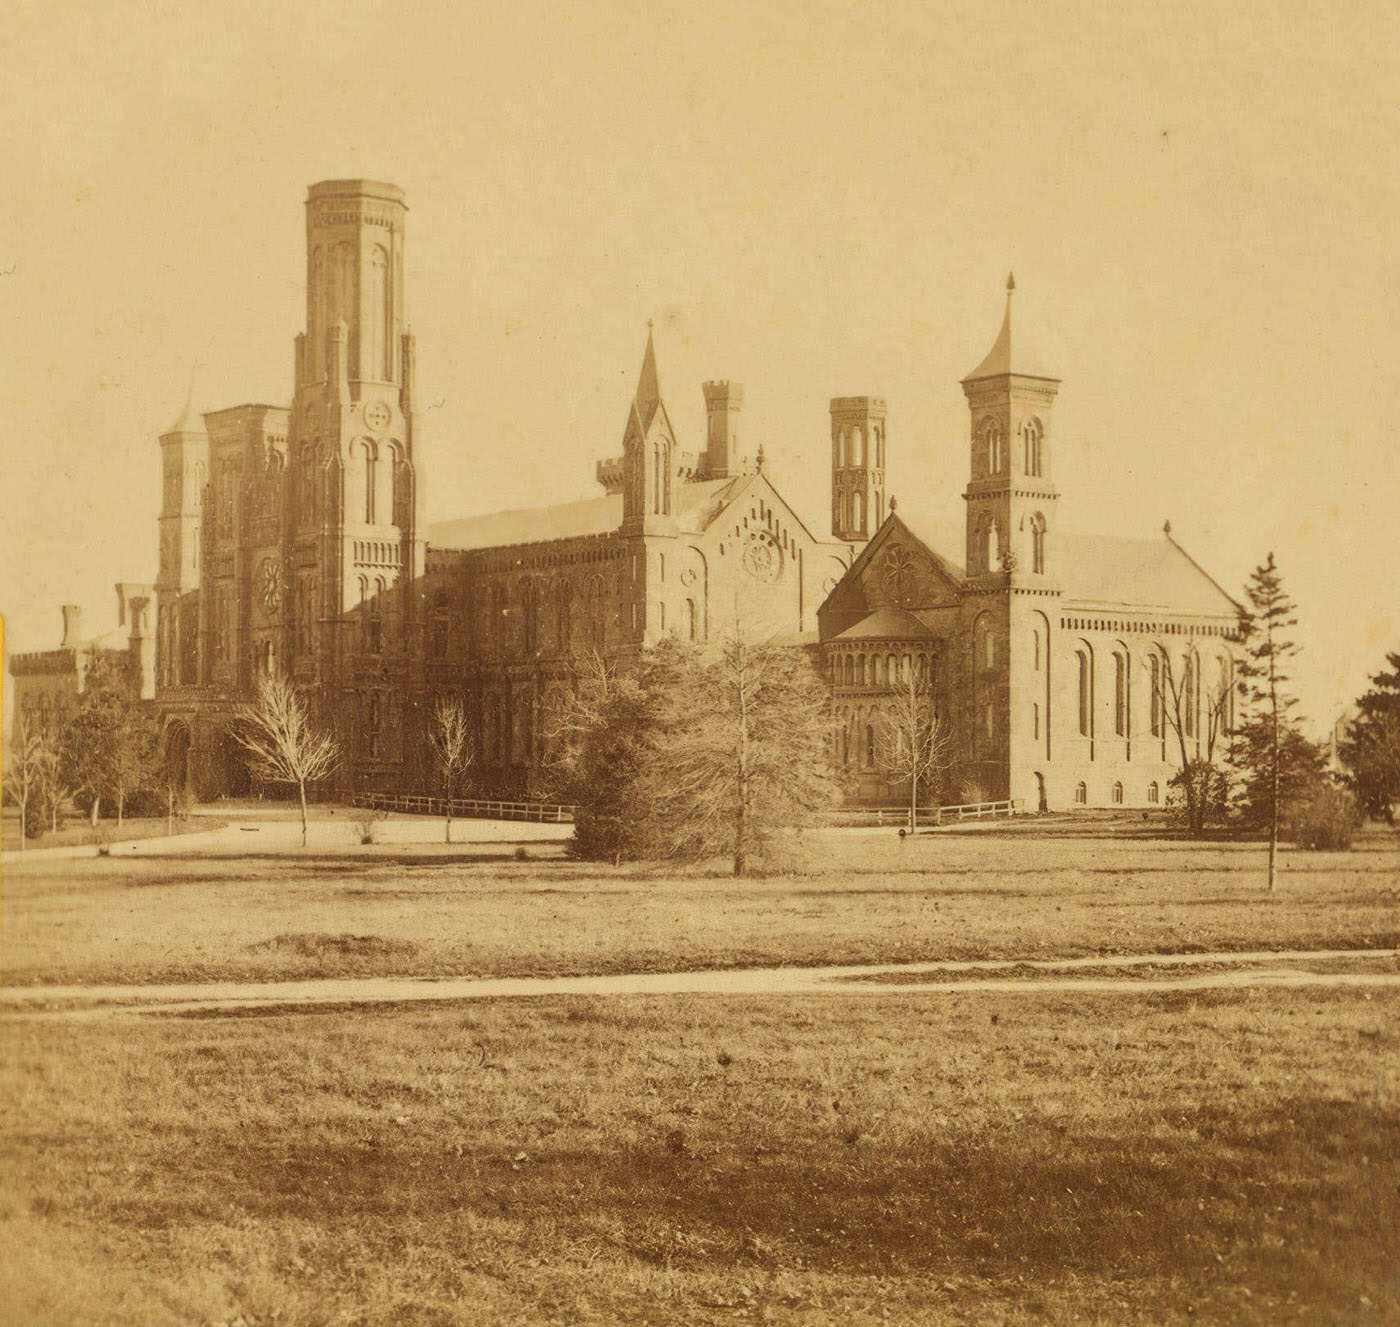 The Smithsonian Institution., Bell & Bro. (Washington, D.C.), Smithsonian Institution, 1869